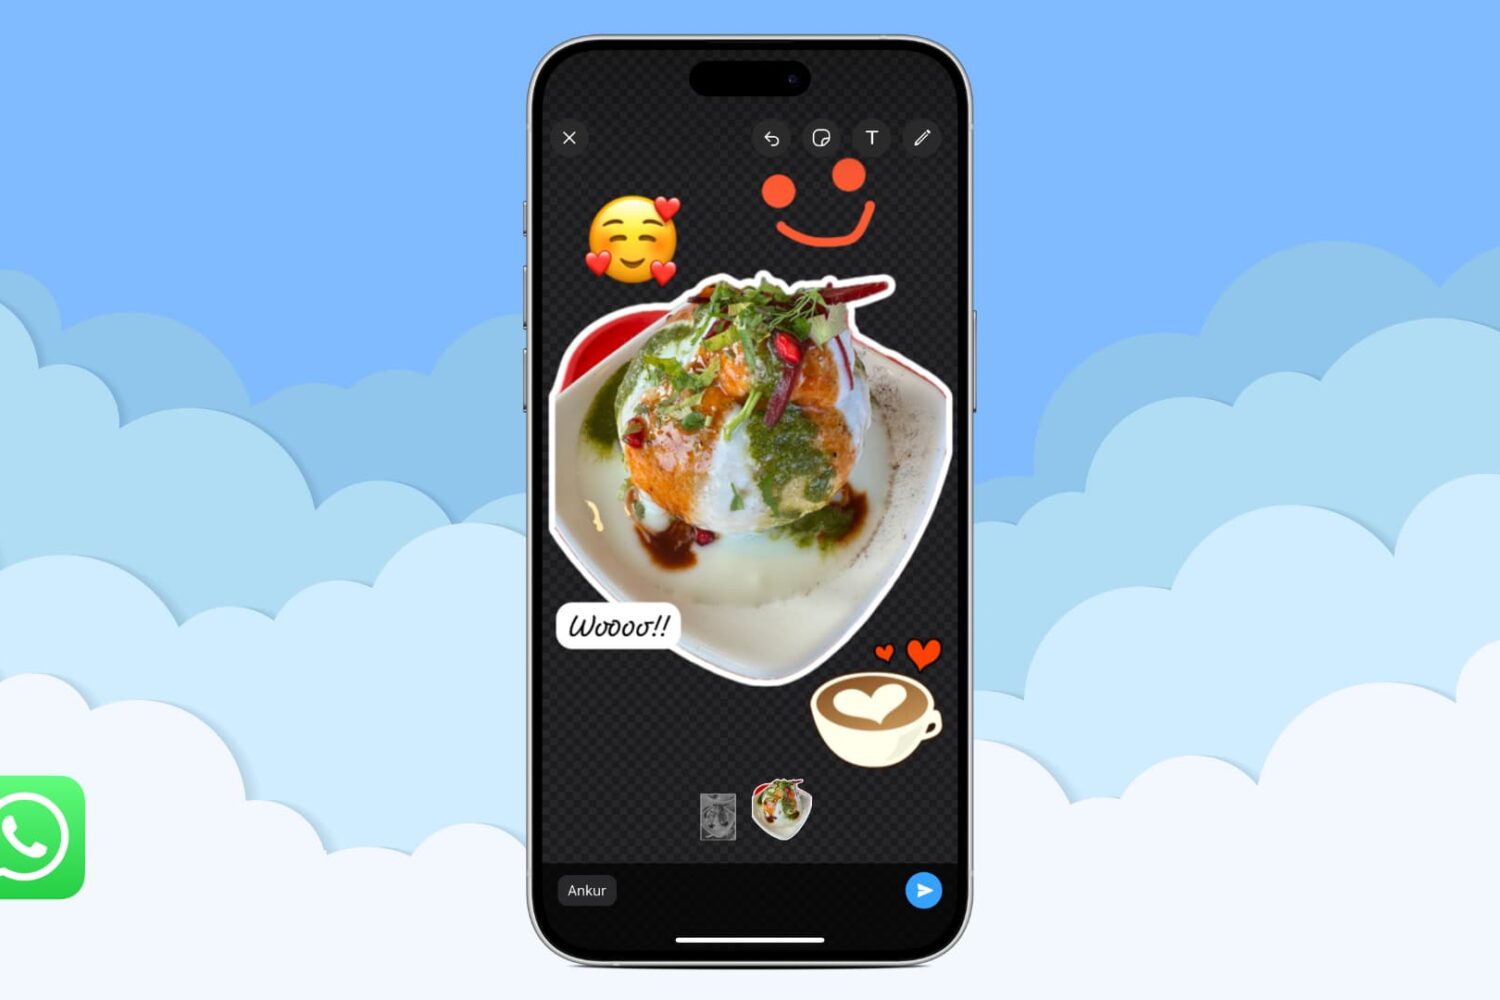 Creating a sticker in WhatsApp on iPhone